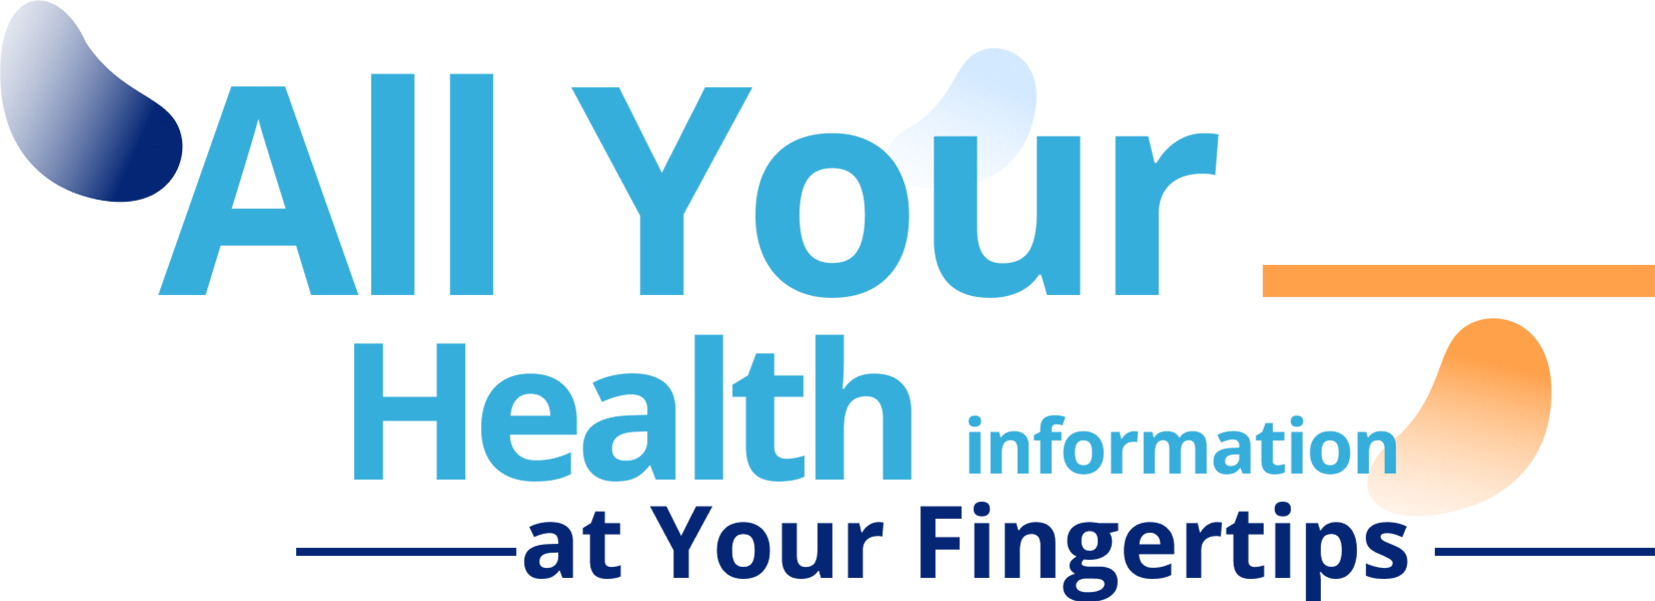 All your health information at your fingertips